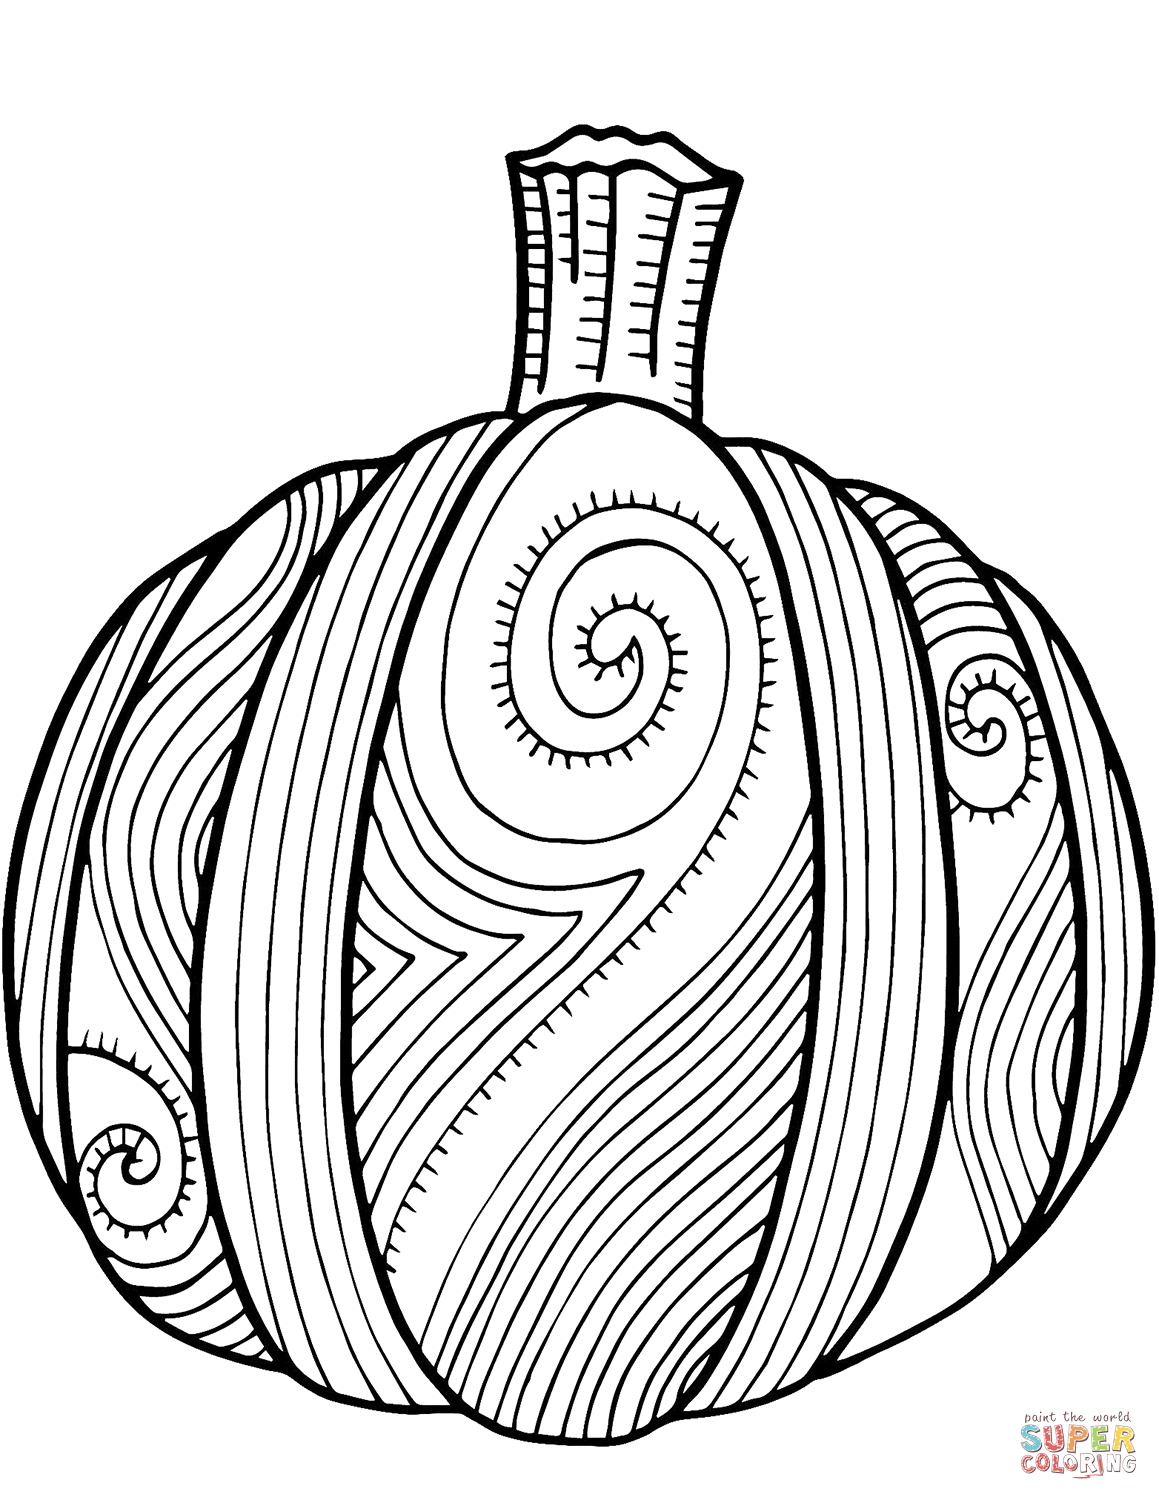 Pumpkin zentangle coloring page free printable coloring pages